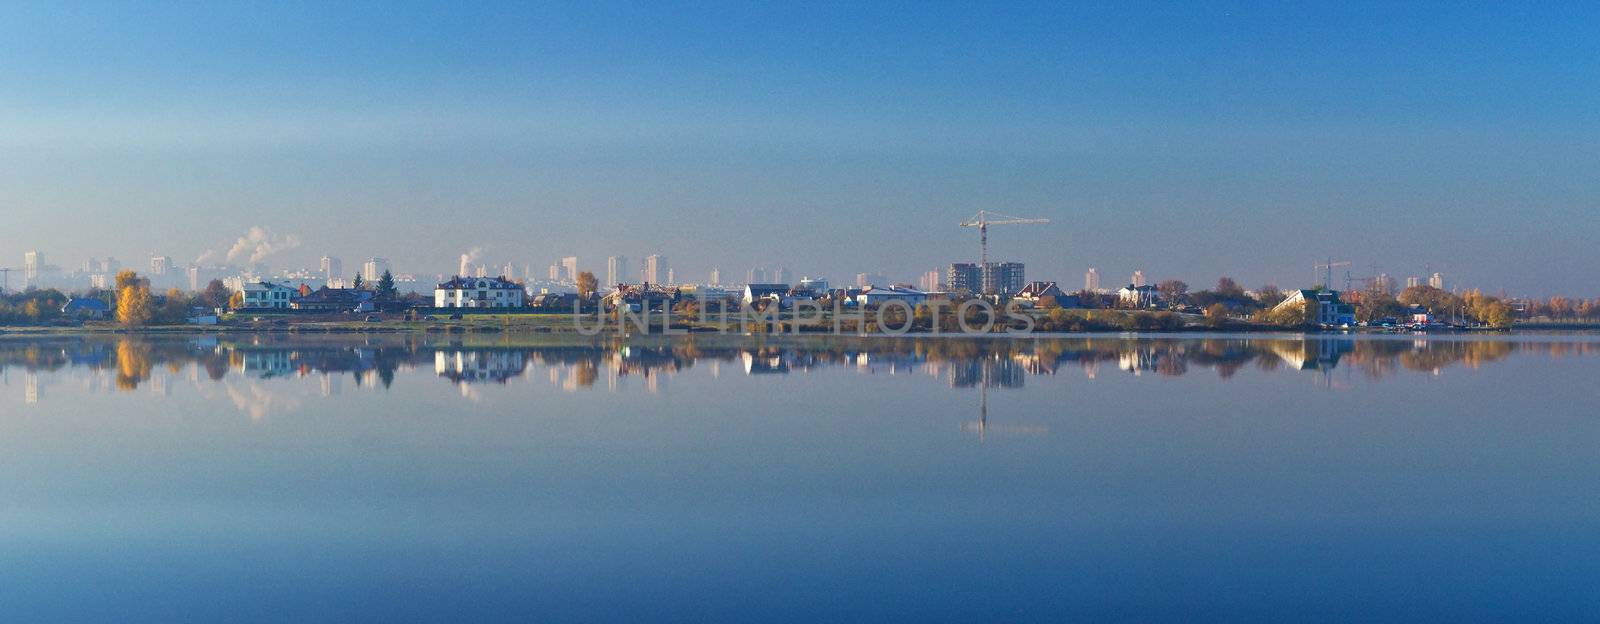 panorama of reflecting city by Alekcey